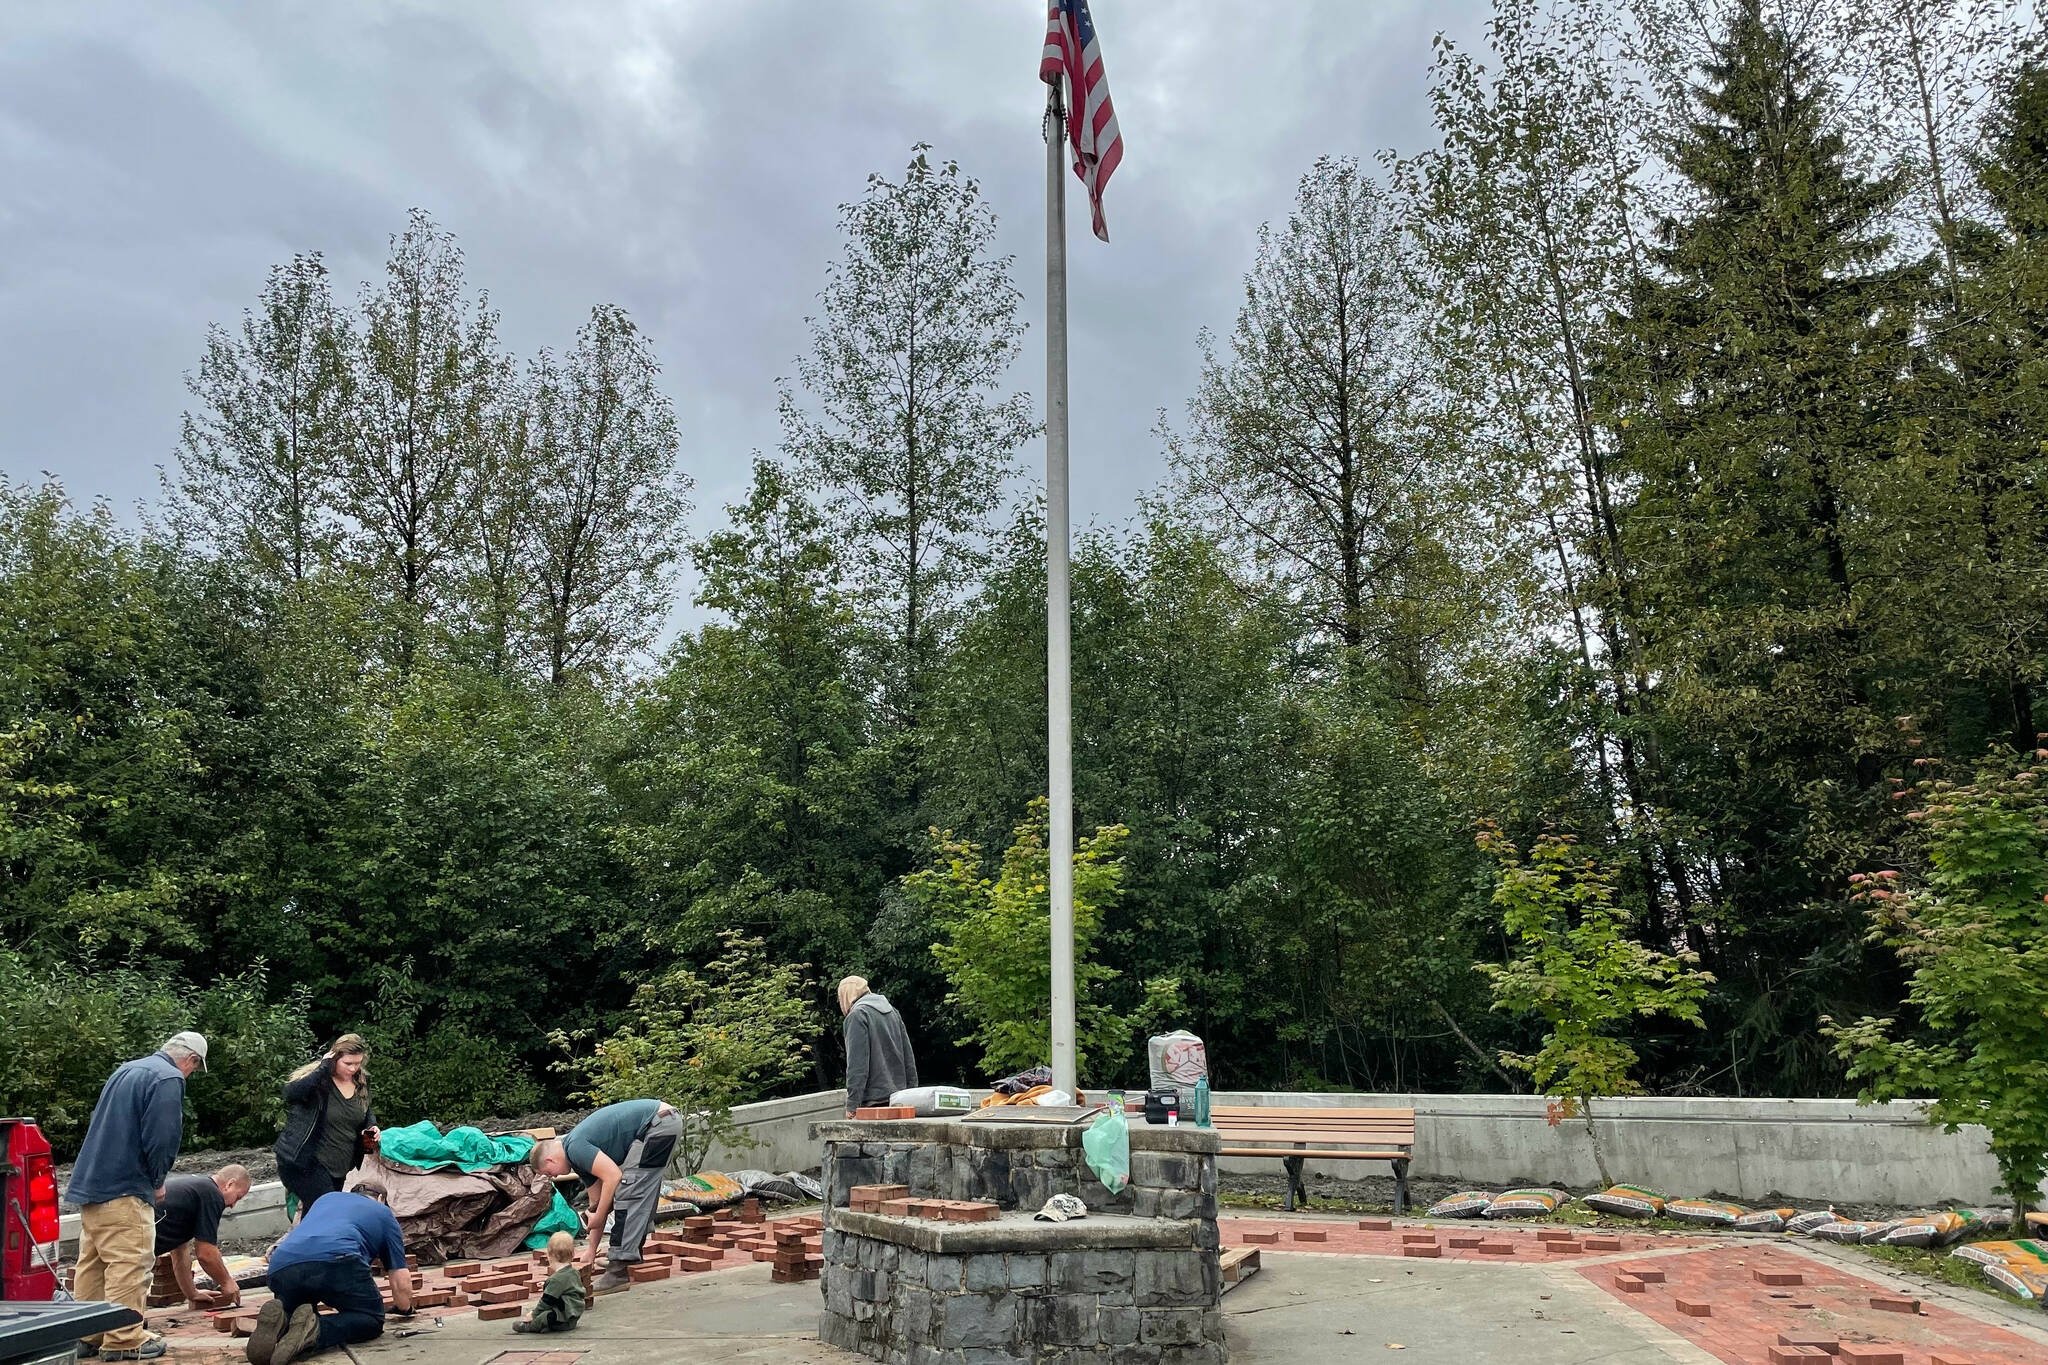 Michael S. Lockett / Juneau Empire 
Juneau Glacier Valley Rotary Club’s 9/11 memorial, shown undergoing beautification and final preparations before the ceremony, will be the site of the organization’s ceremony for the 20th anniversary of the attacks on Saturday.